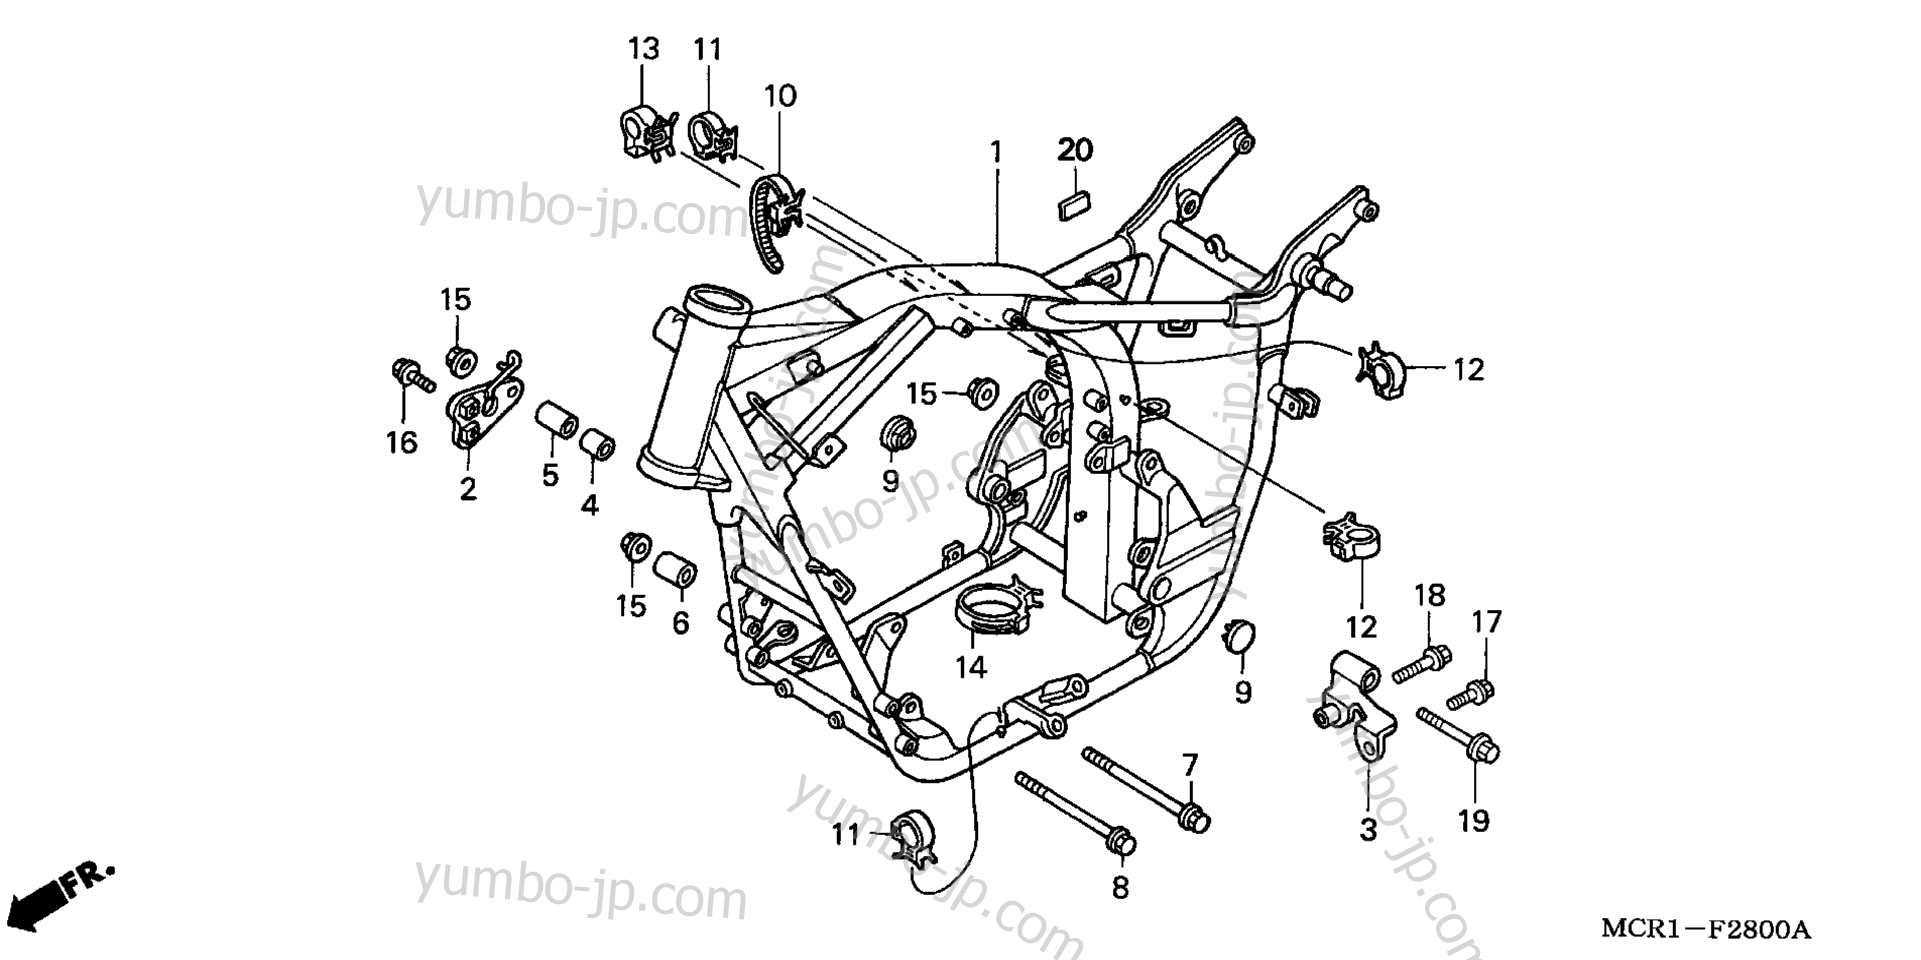 FRAME for motorcycles HONDA VT750DC A/B 2001 year